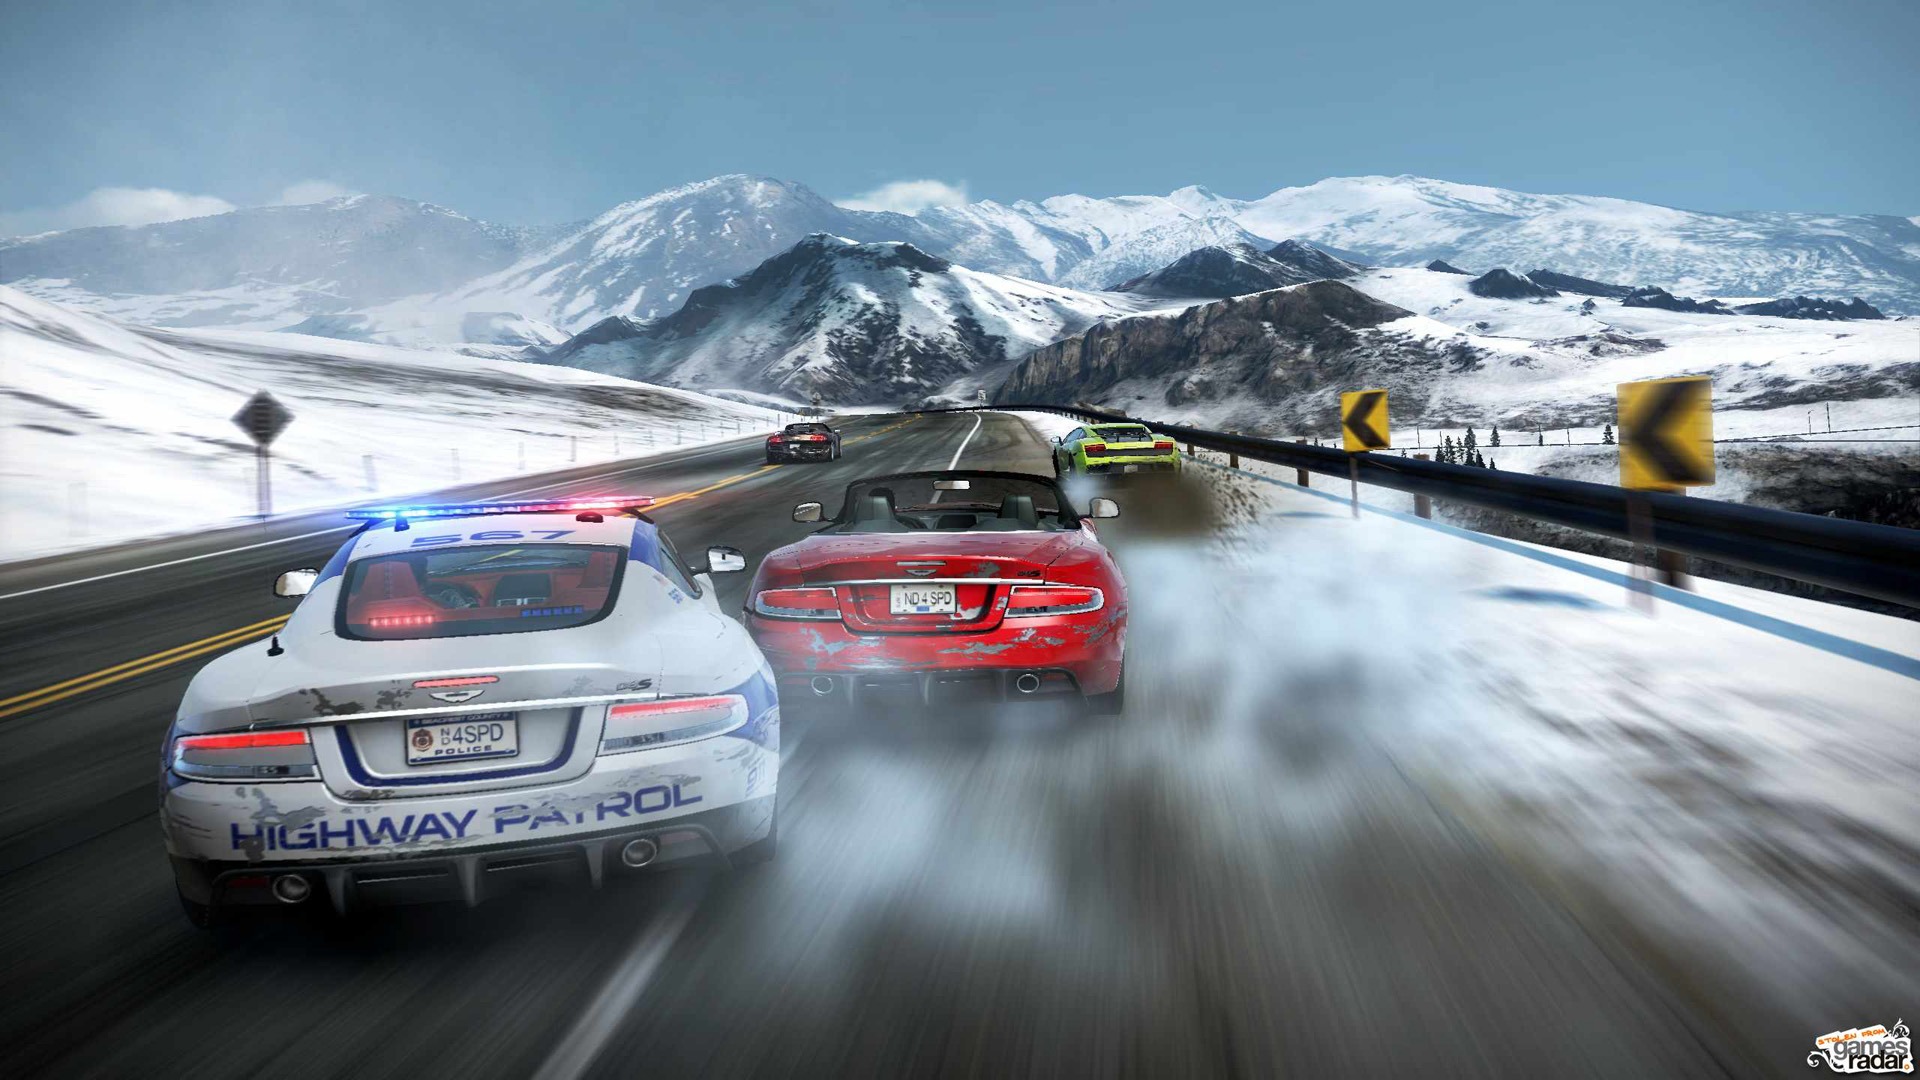 Need for Speed: Hot Pursuit 極品飛車14：熱力追踪 #5 - 1920x1080